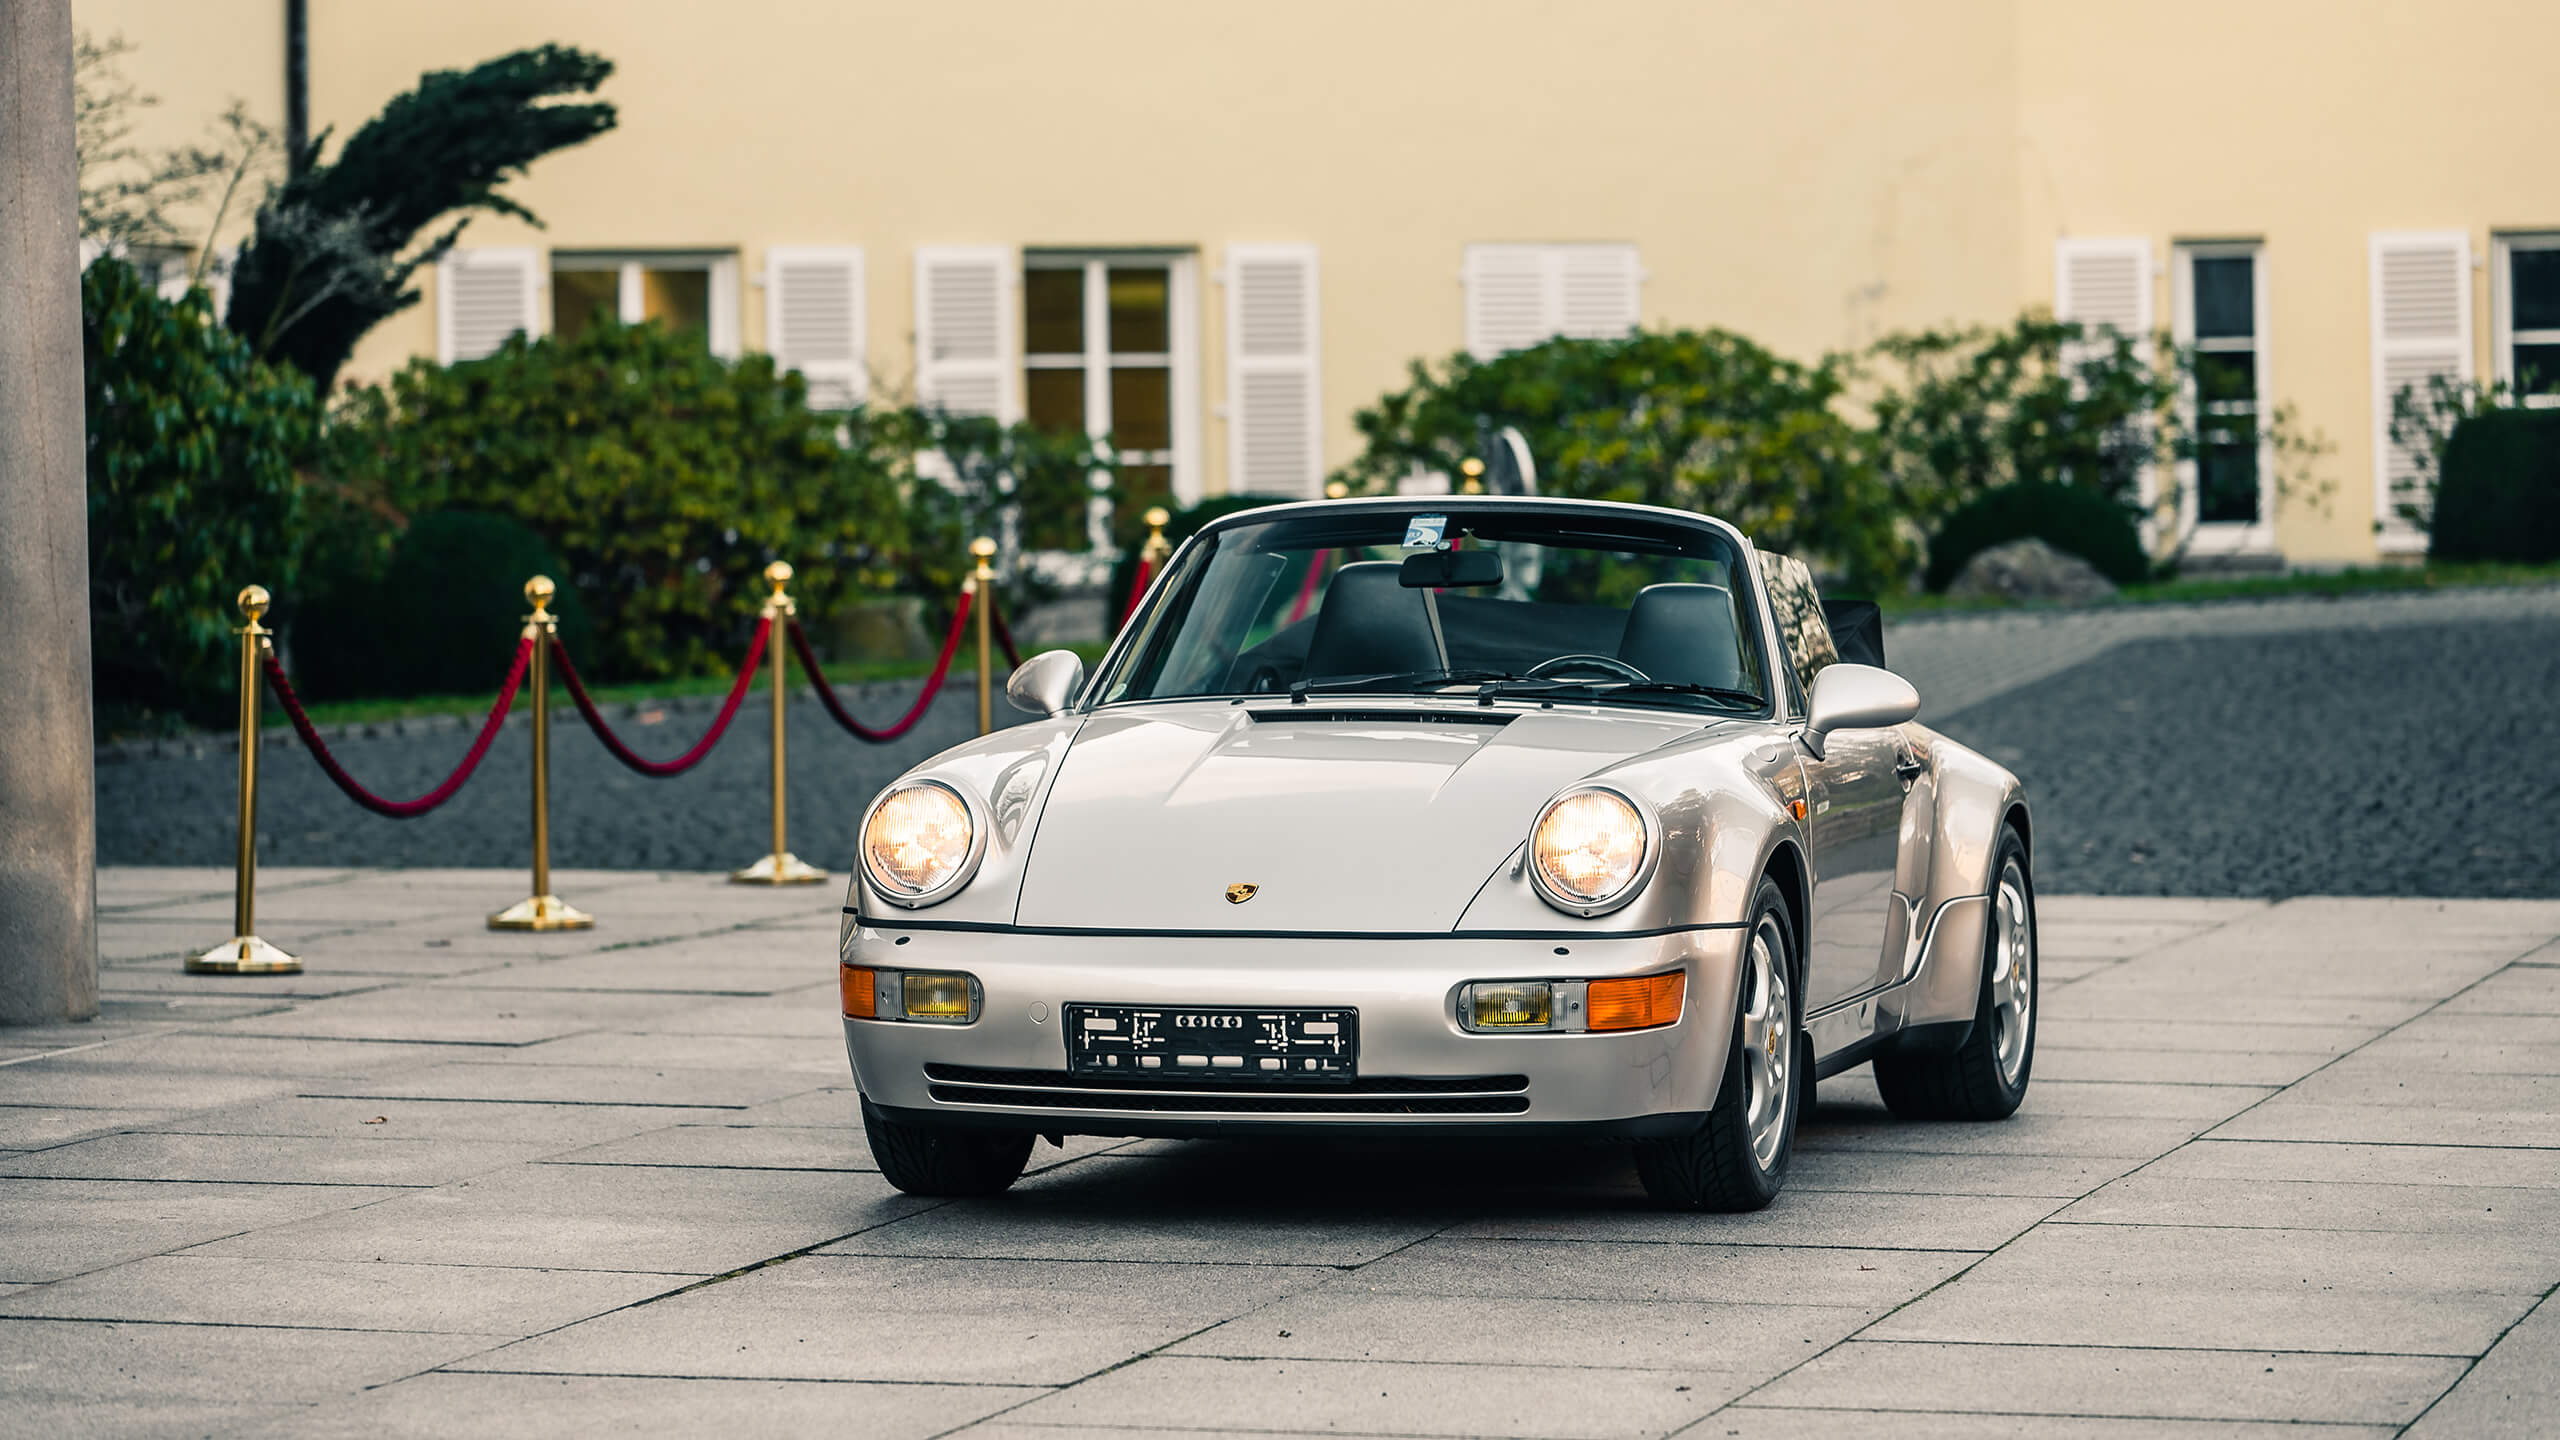 Maradona’s Porsche gives Bonhams the lead at its first internet-only sale